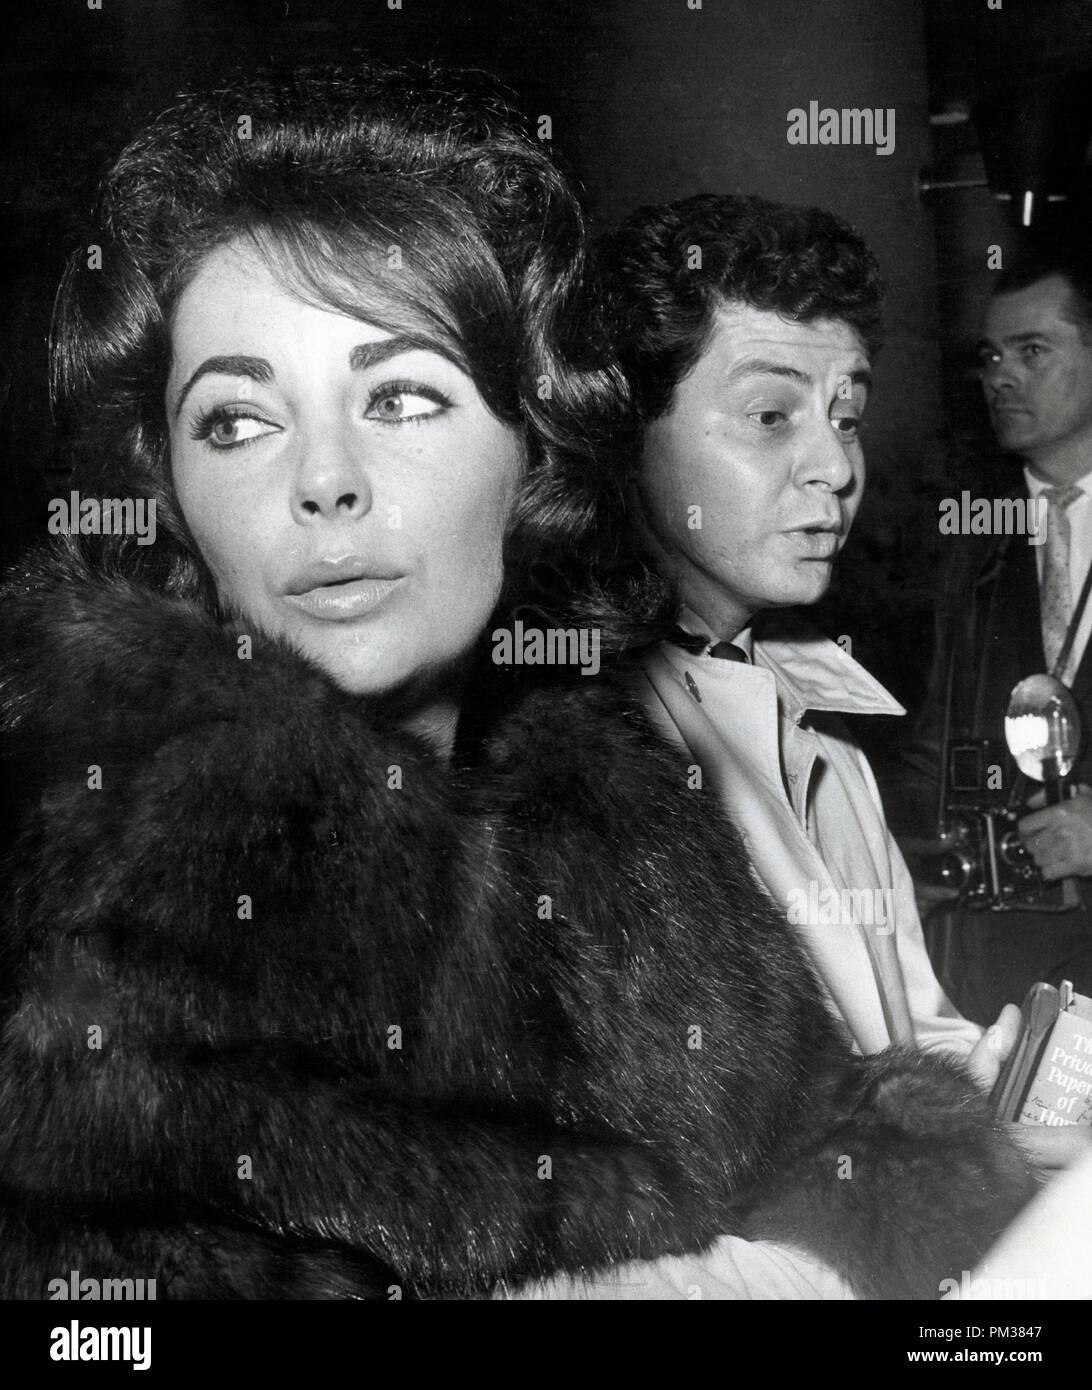 Eddie Fisher And Elizabeth Taylor 1960 File Reference 1150 005tha C Jrc The Hollywood Archive All Rights Reserved Stock Photo Alamy